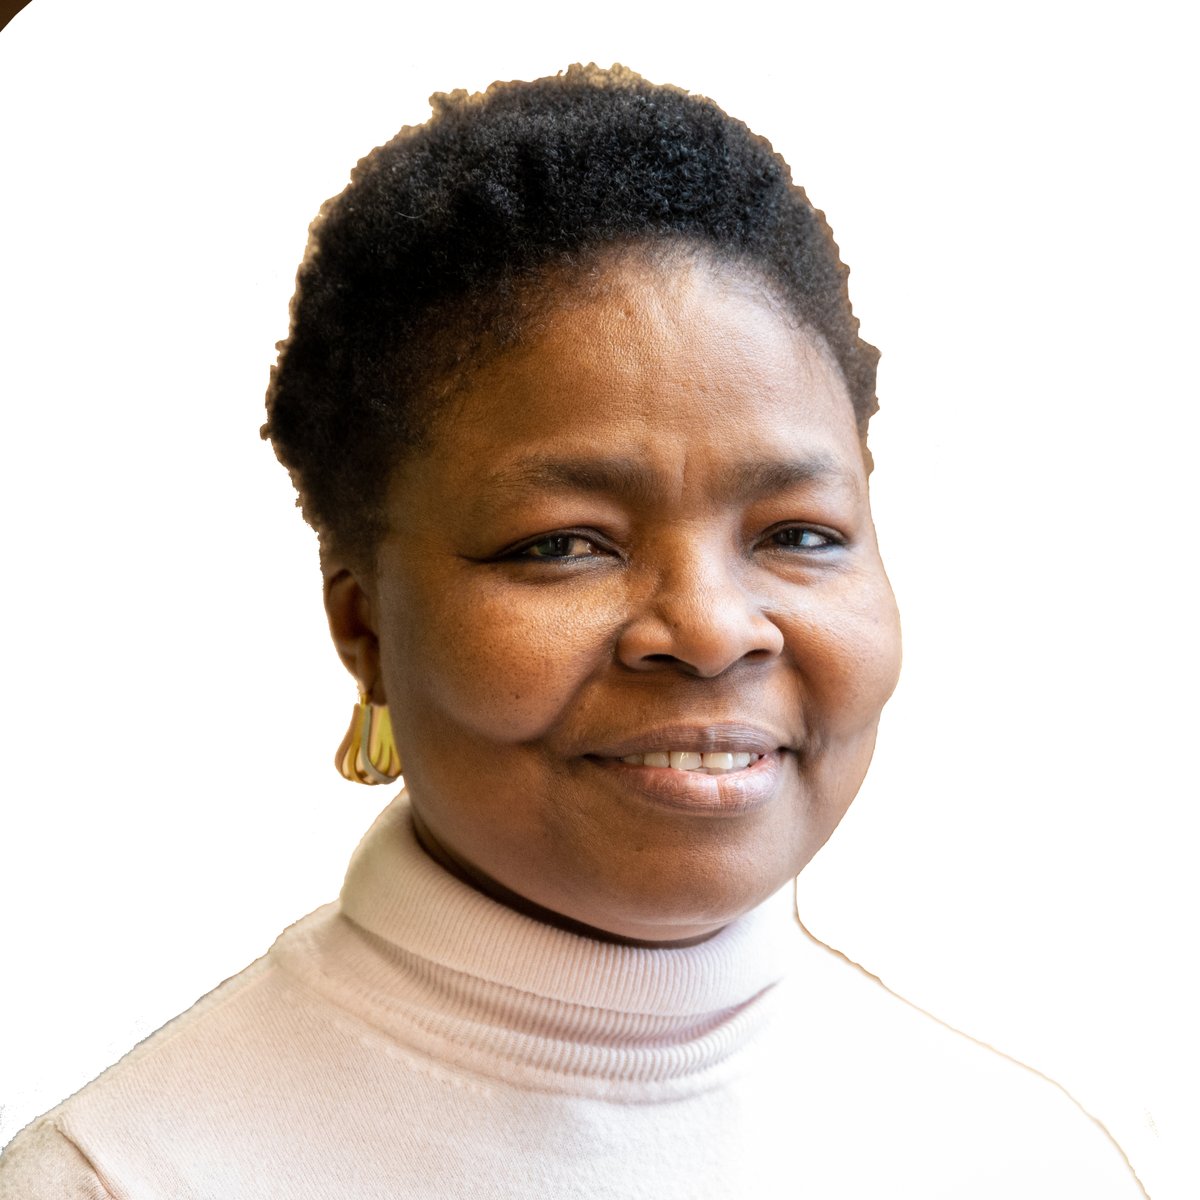 Ngozi Elumogo, Consultant Medical Microbiologist and senior research fellow at the Quadram Institute, has played a key role developing updated national clinical guidelines for faecal microbiota transplant (FMT). Read more: orlo.uk/NCzgc